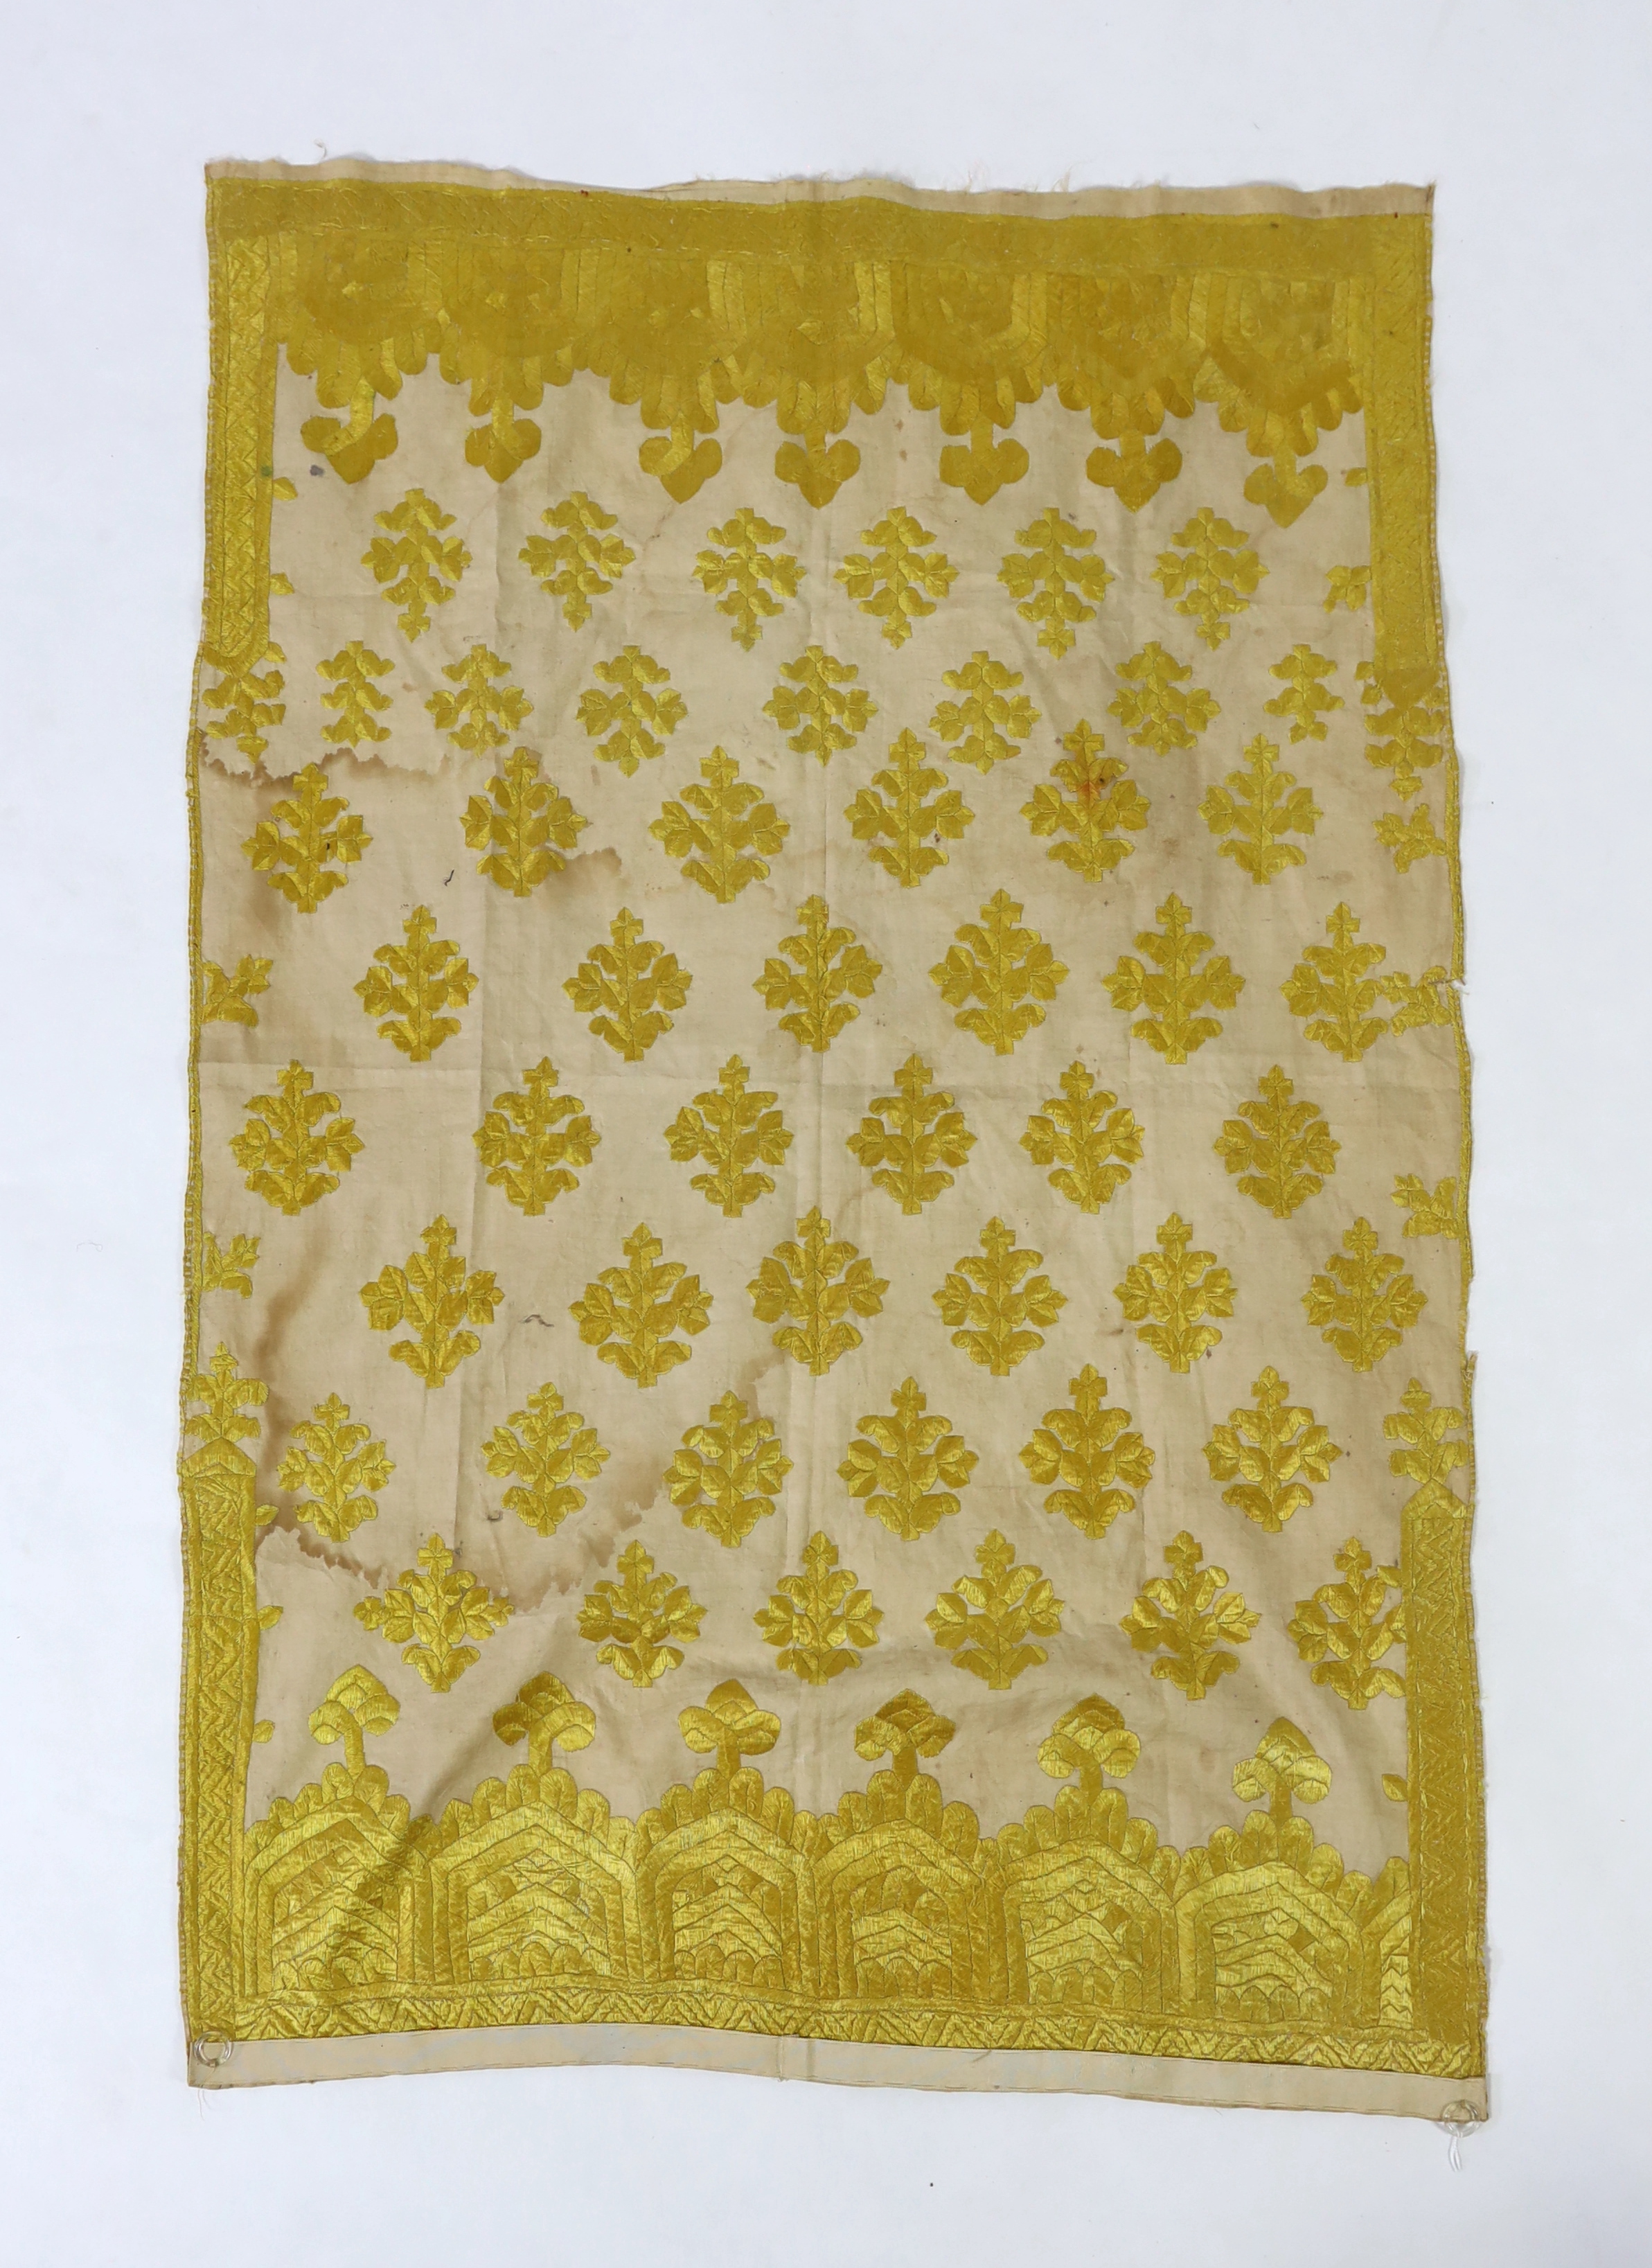 An early 20th century North Indian cotton yellow silk hand embroidered panel, with wide embroidered borders and all over stylistic spot motifs, 122 cm long x 80cm wide